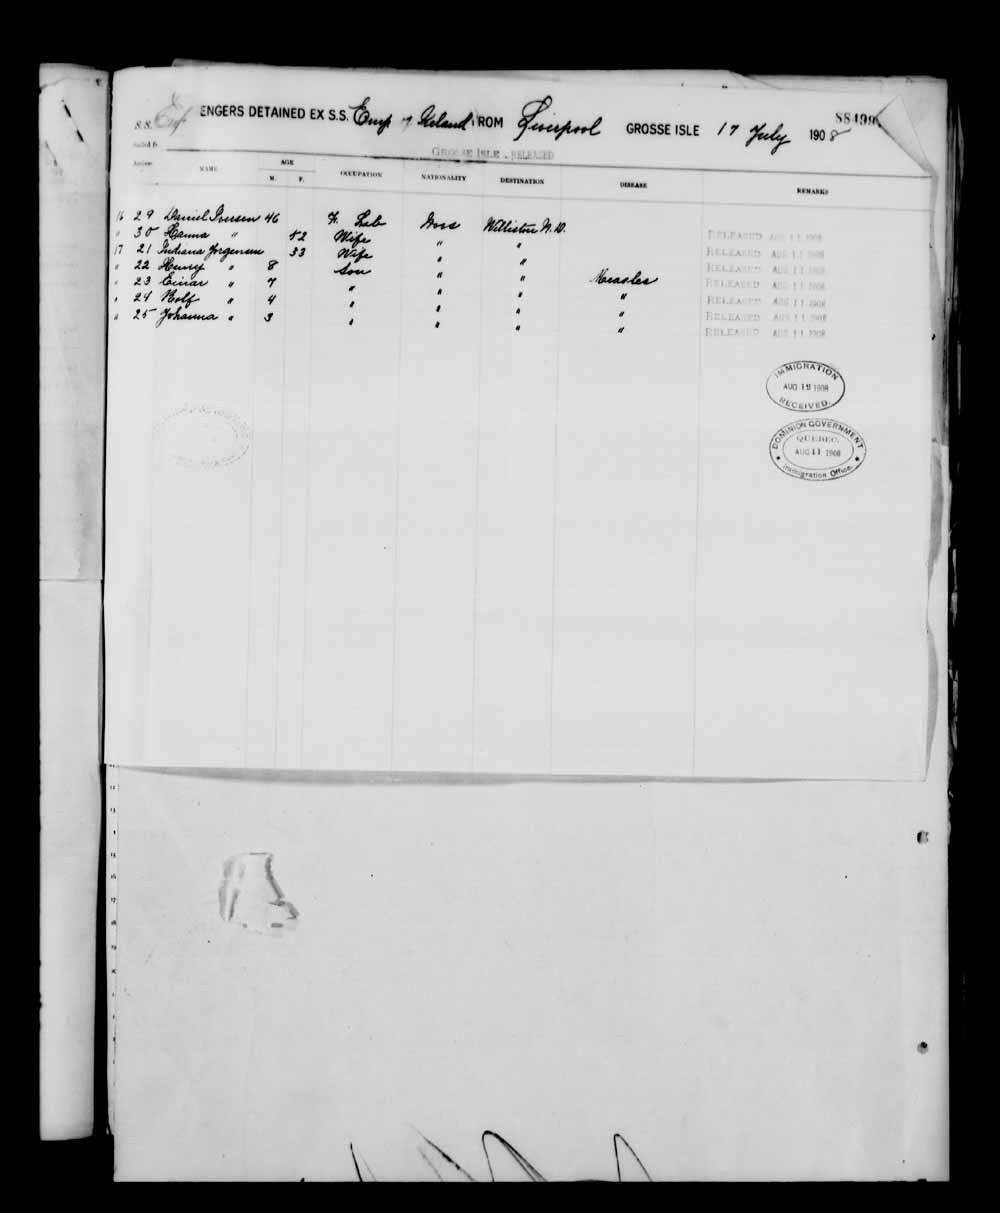 Digitized page of Quebec Passenger Lists for Image No.: e003591250